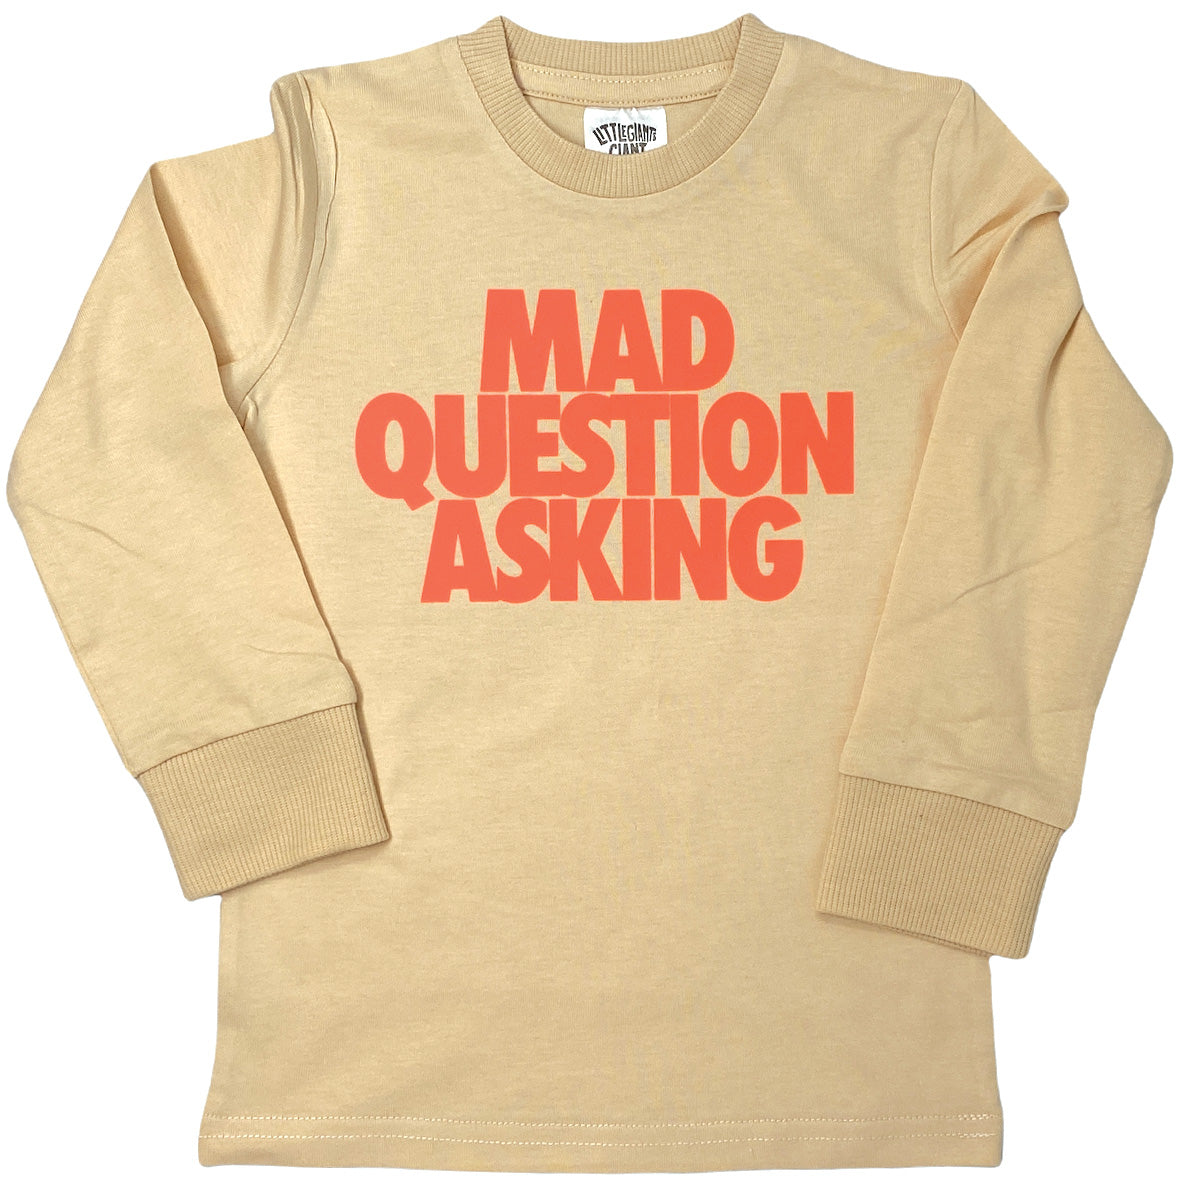 Mad Question Asking Long T-shirt (Sand)